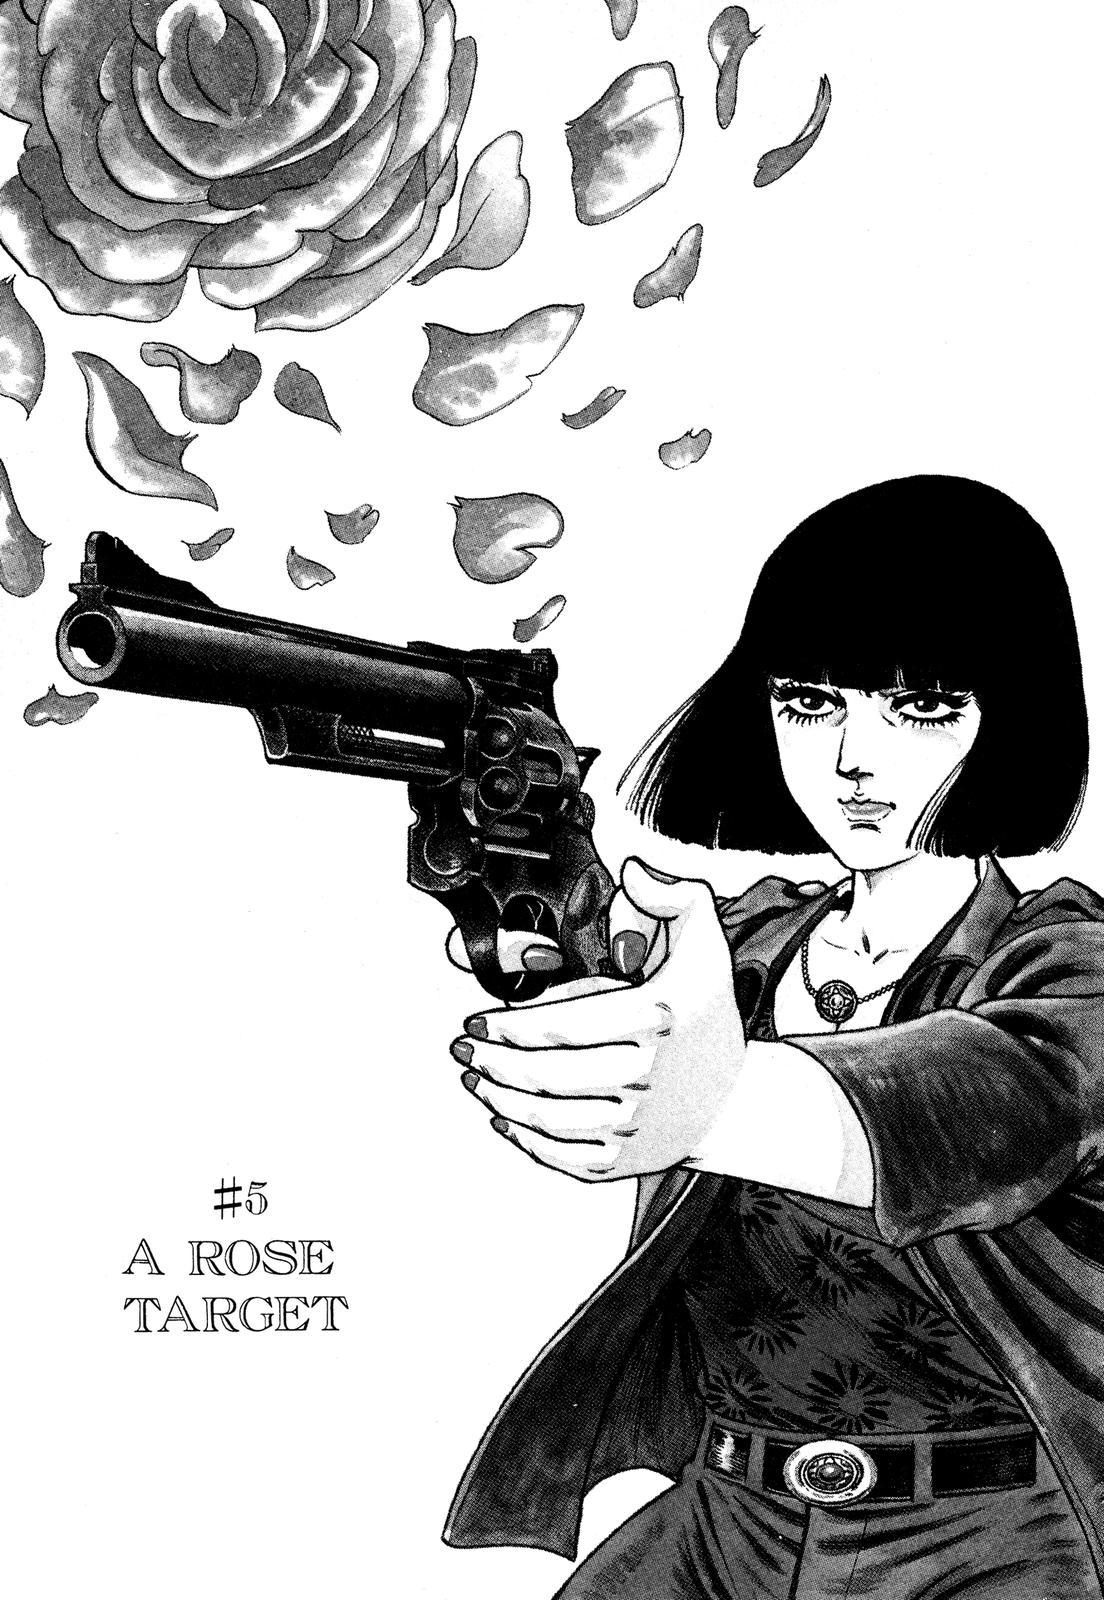 Doll: The Hotel Detective Vol. 3 Ch. 16 A Rose Target